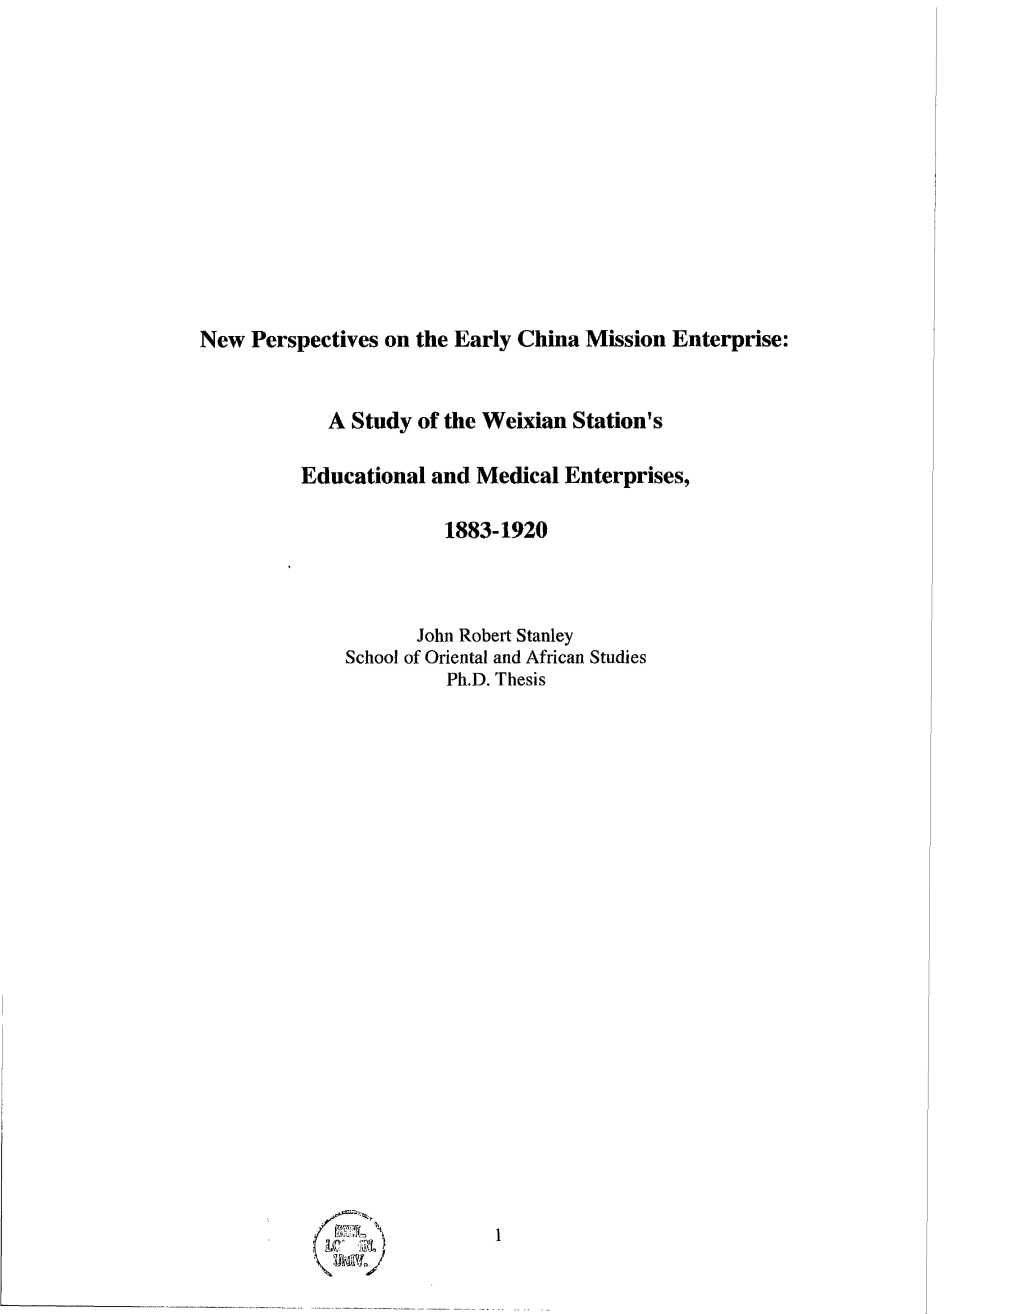 New Perspectives on the Early China Mission Enterprise